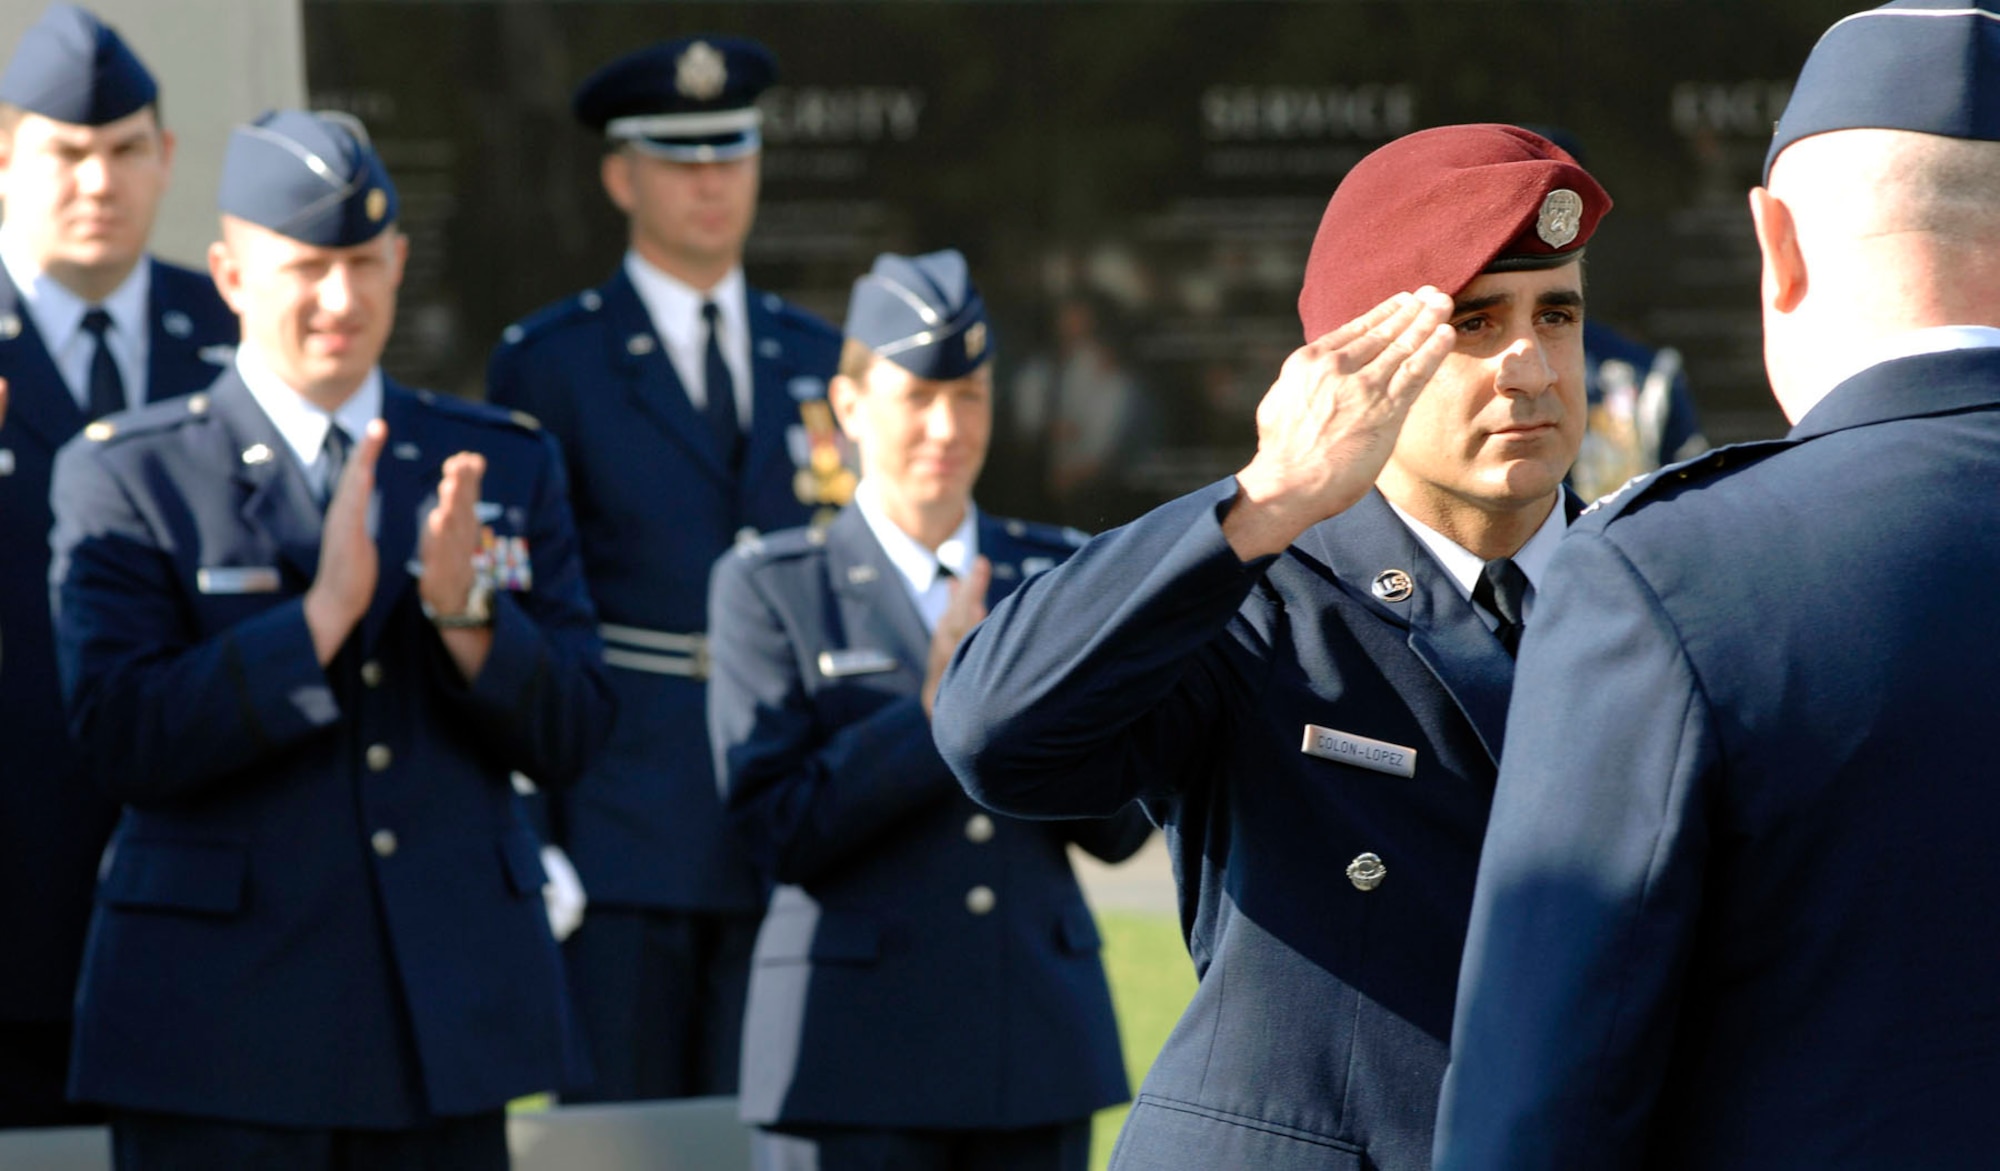 Senior Master Sgt. Ramon Colon-Lopez was one of the first six Airmen to receive the newly-created Combat Action Medal from USAF Chief of Staff Gen. T. Michael Moseley. He was also awarded the Bronze Star with Valor for his actions during the engagement. (U.S. Air Force photo)